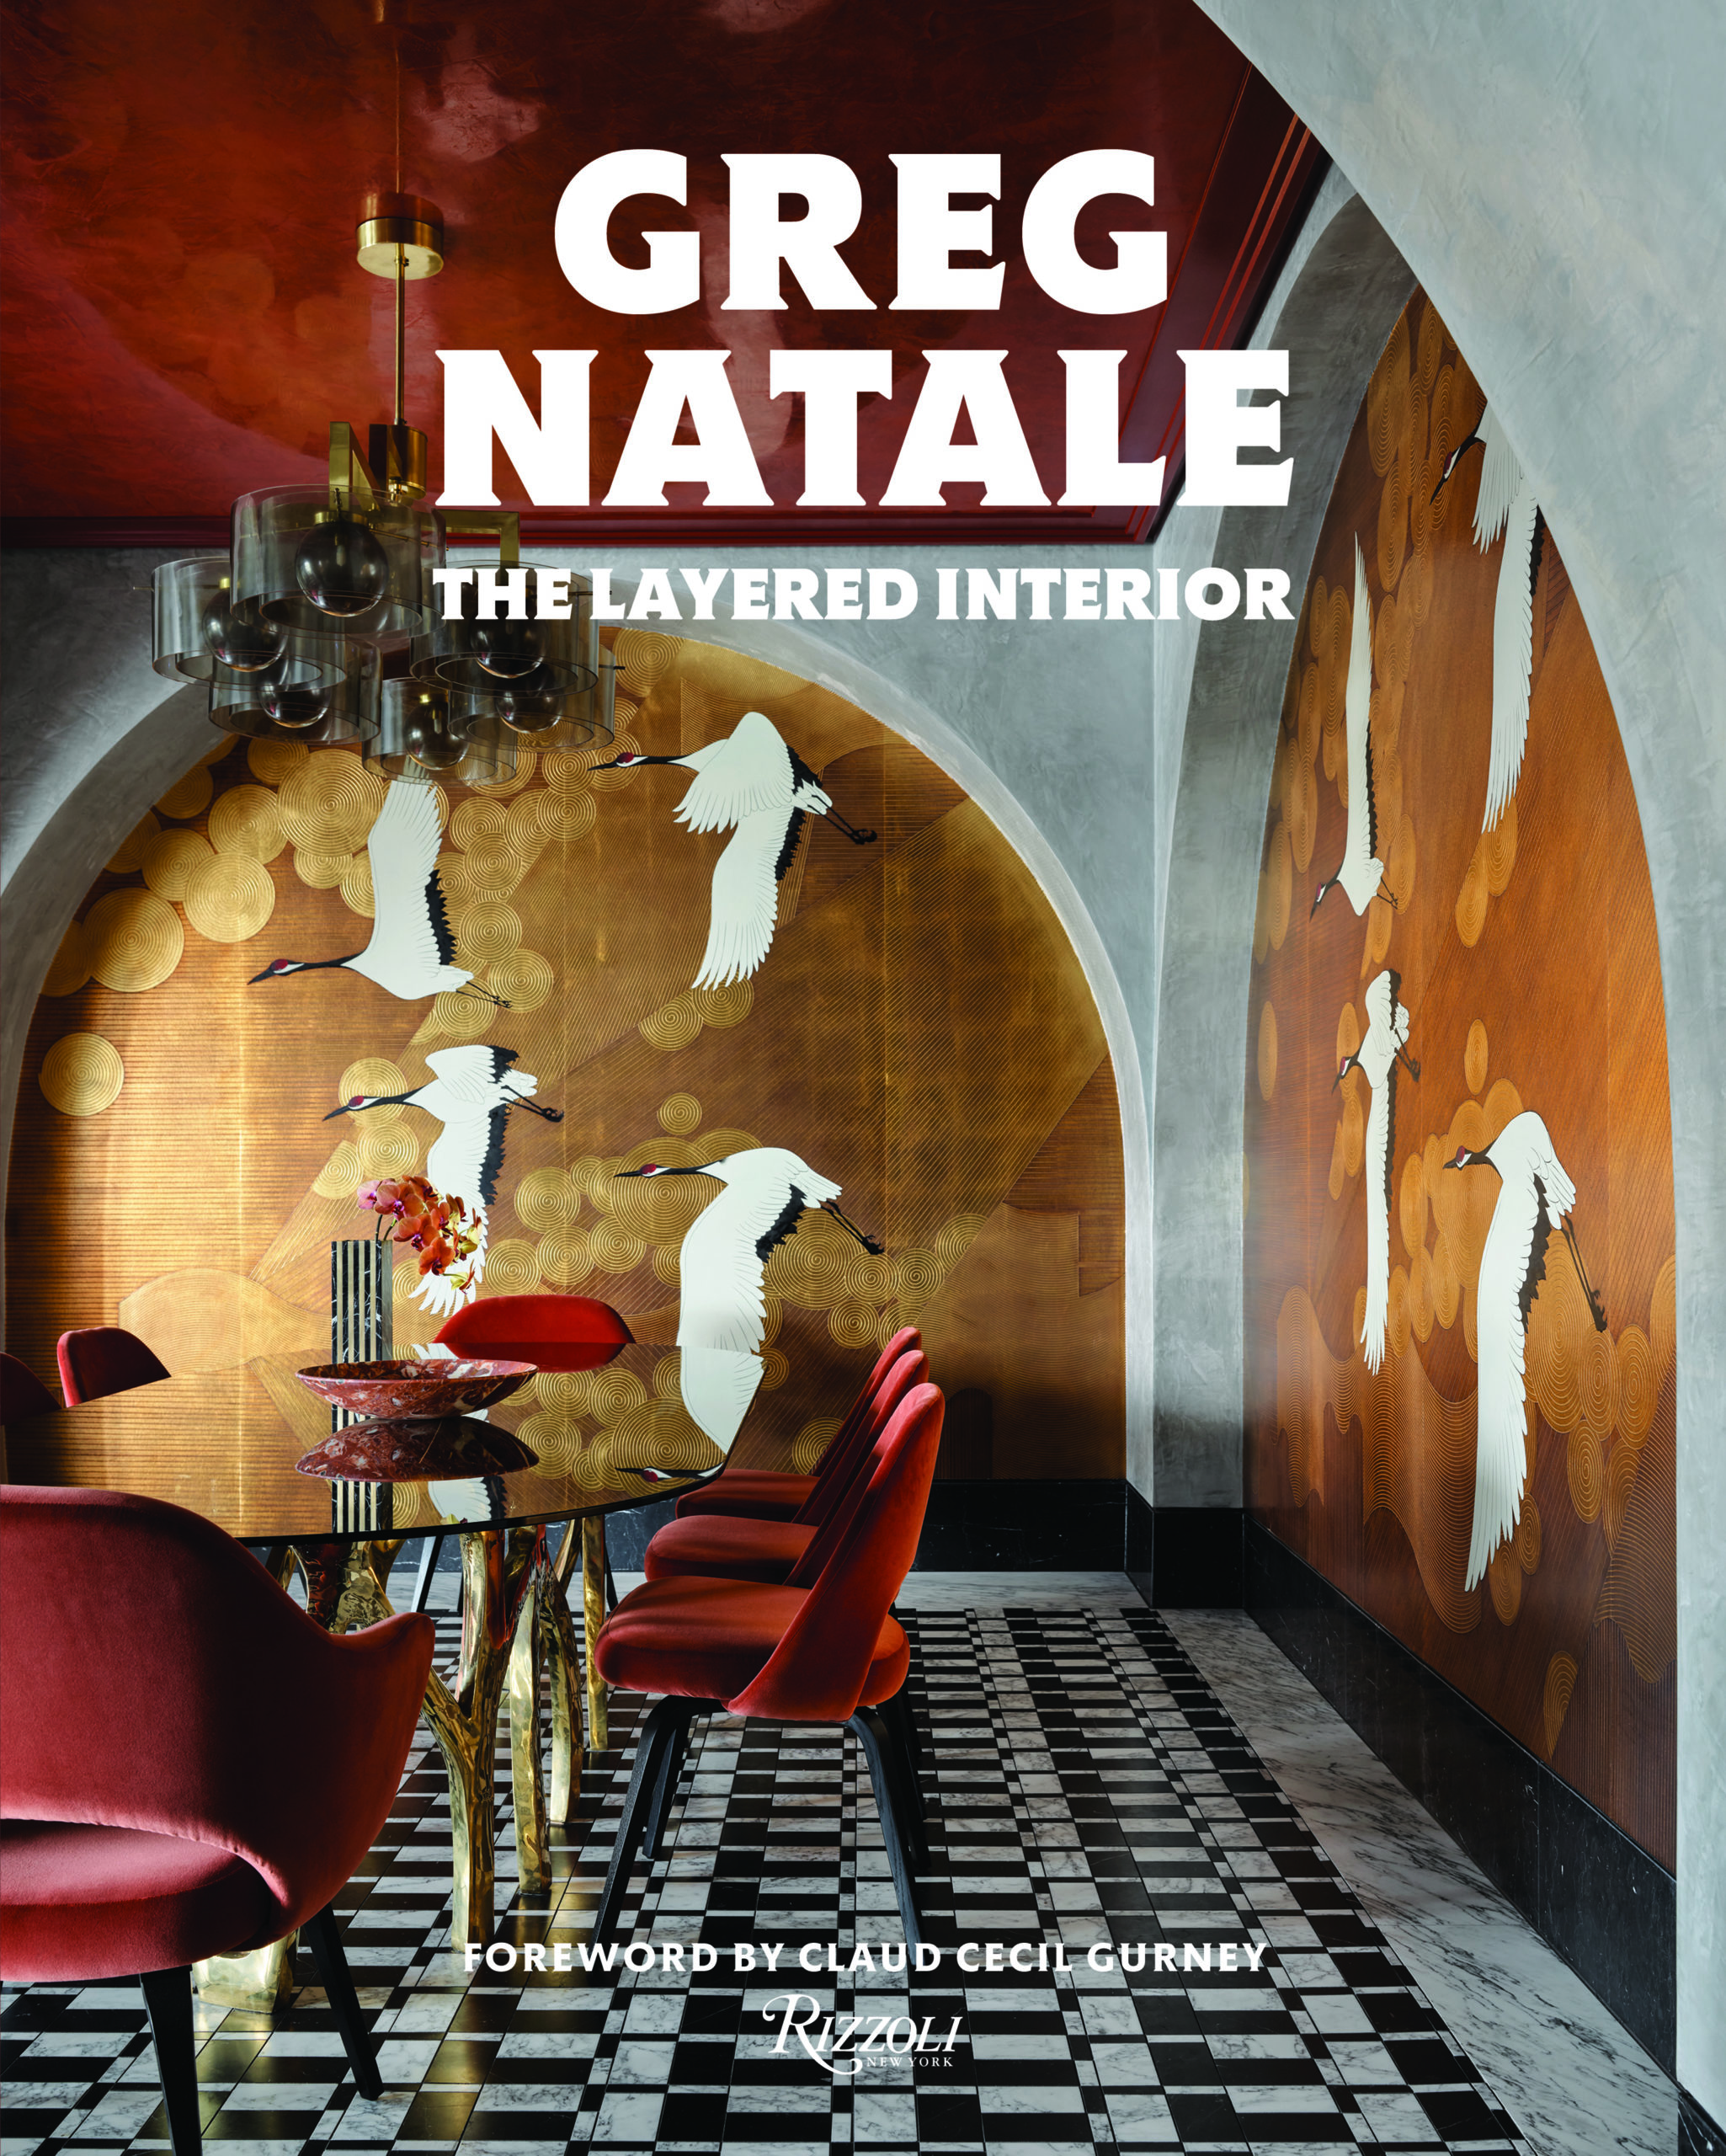 THE LAYERED INTERIOR BY GREG NATALE